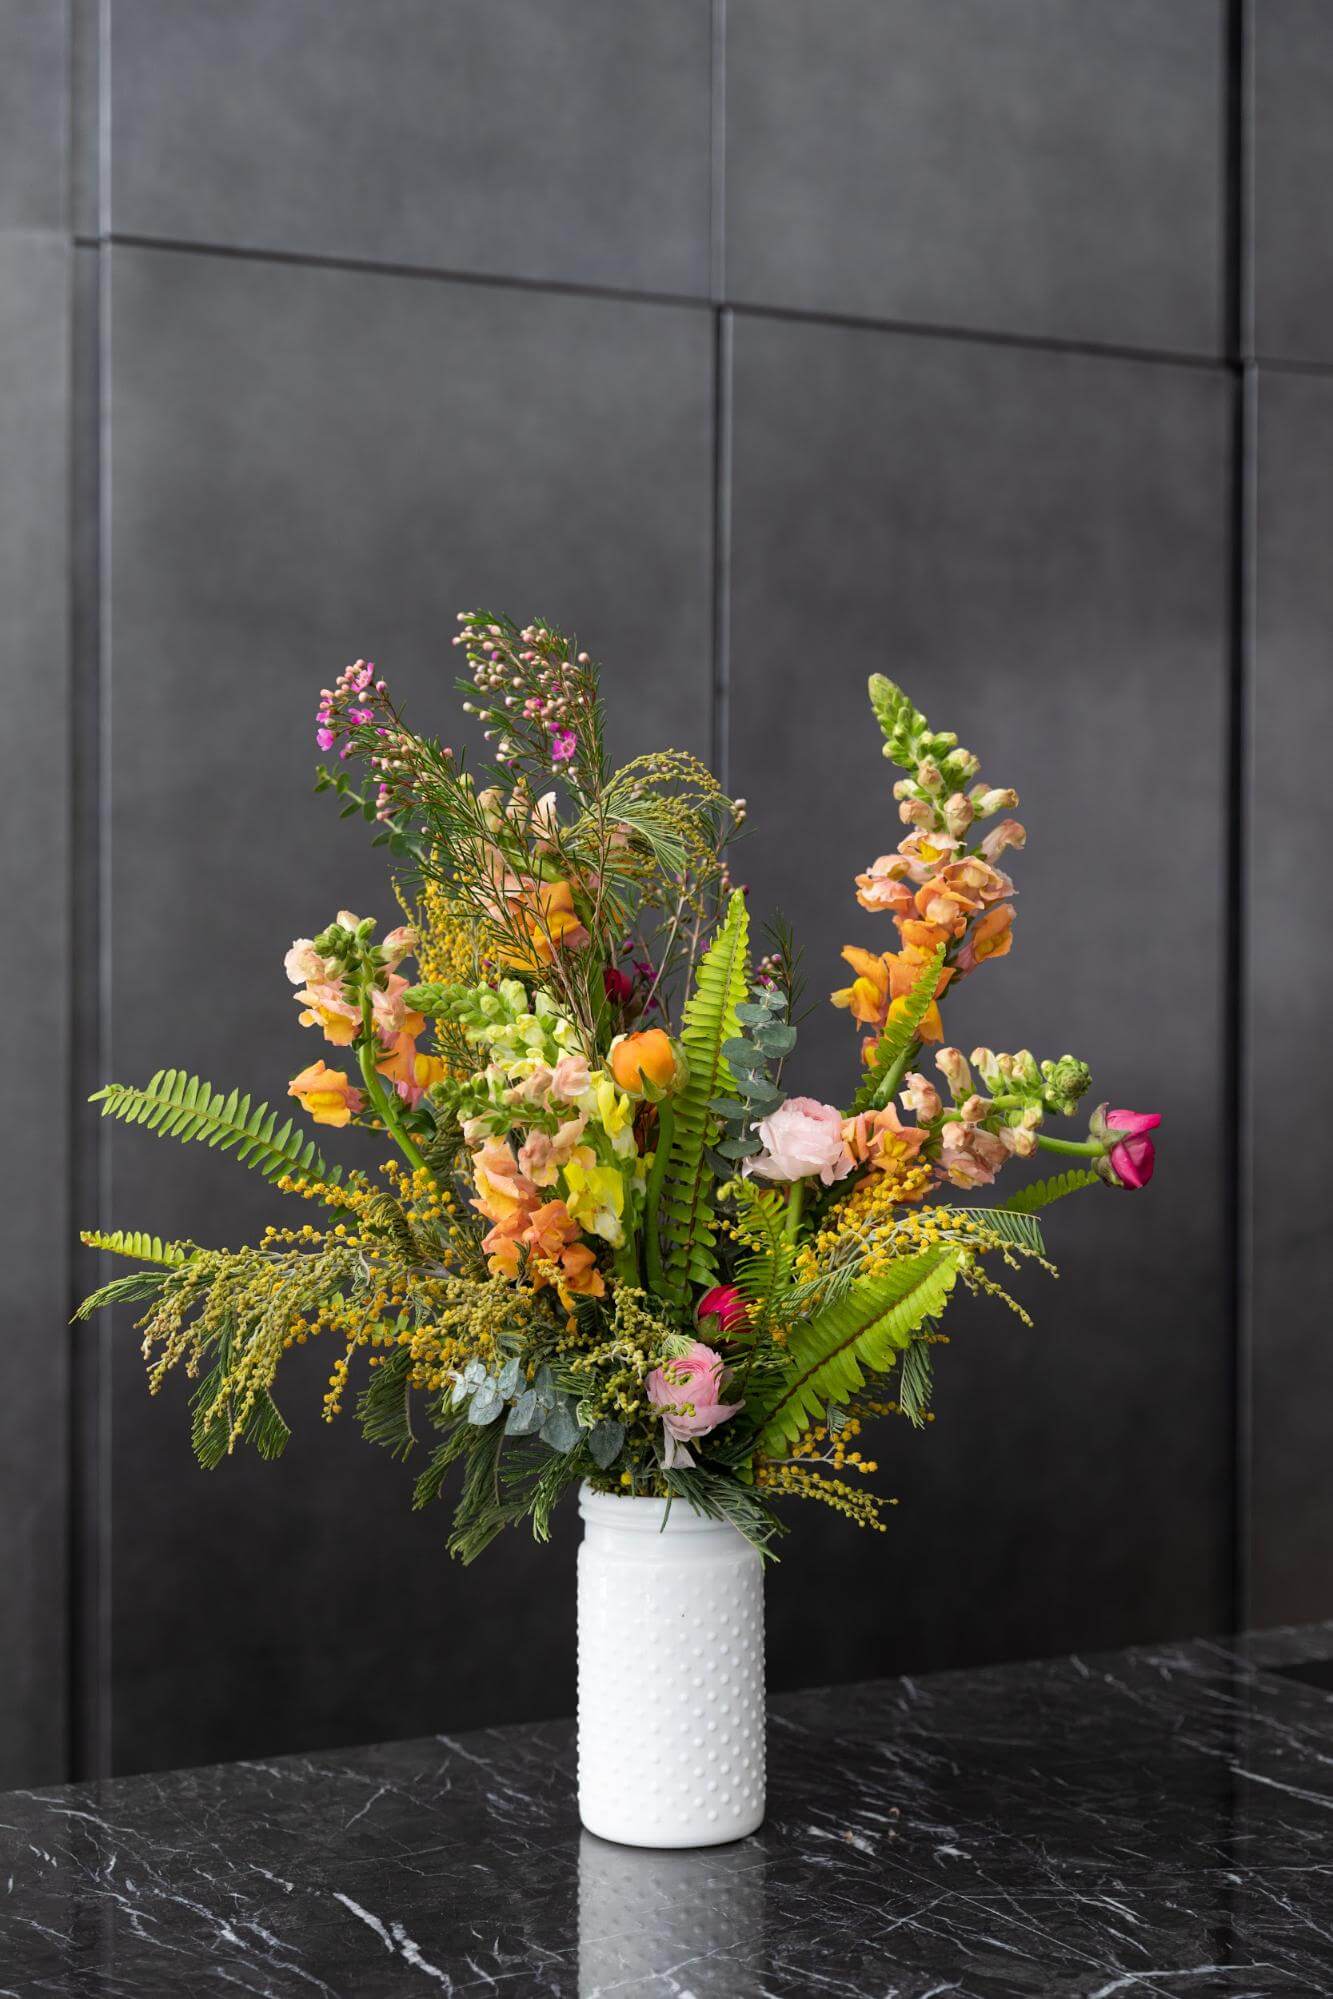 Petalled floral arrangement kits look great in your client’s office or at home